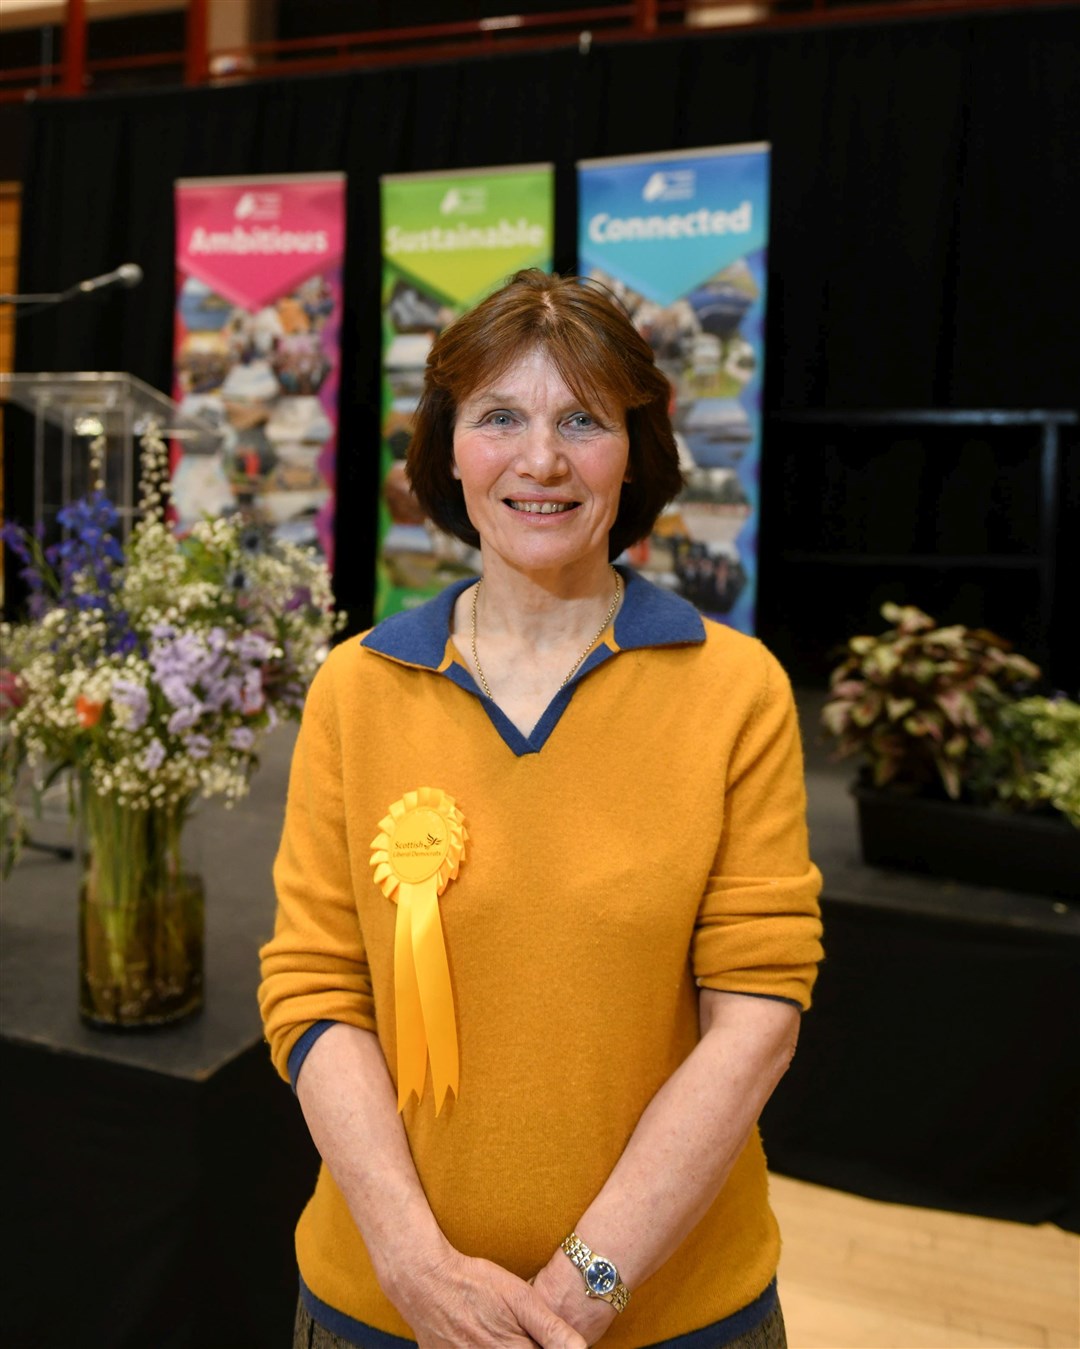 Sarah Rawlings was elected to the Tain and Easter Ross seat for the Scottish Liberal Democrats at the last Highland Council election. Picture: Callum Mackay